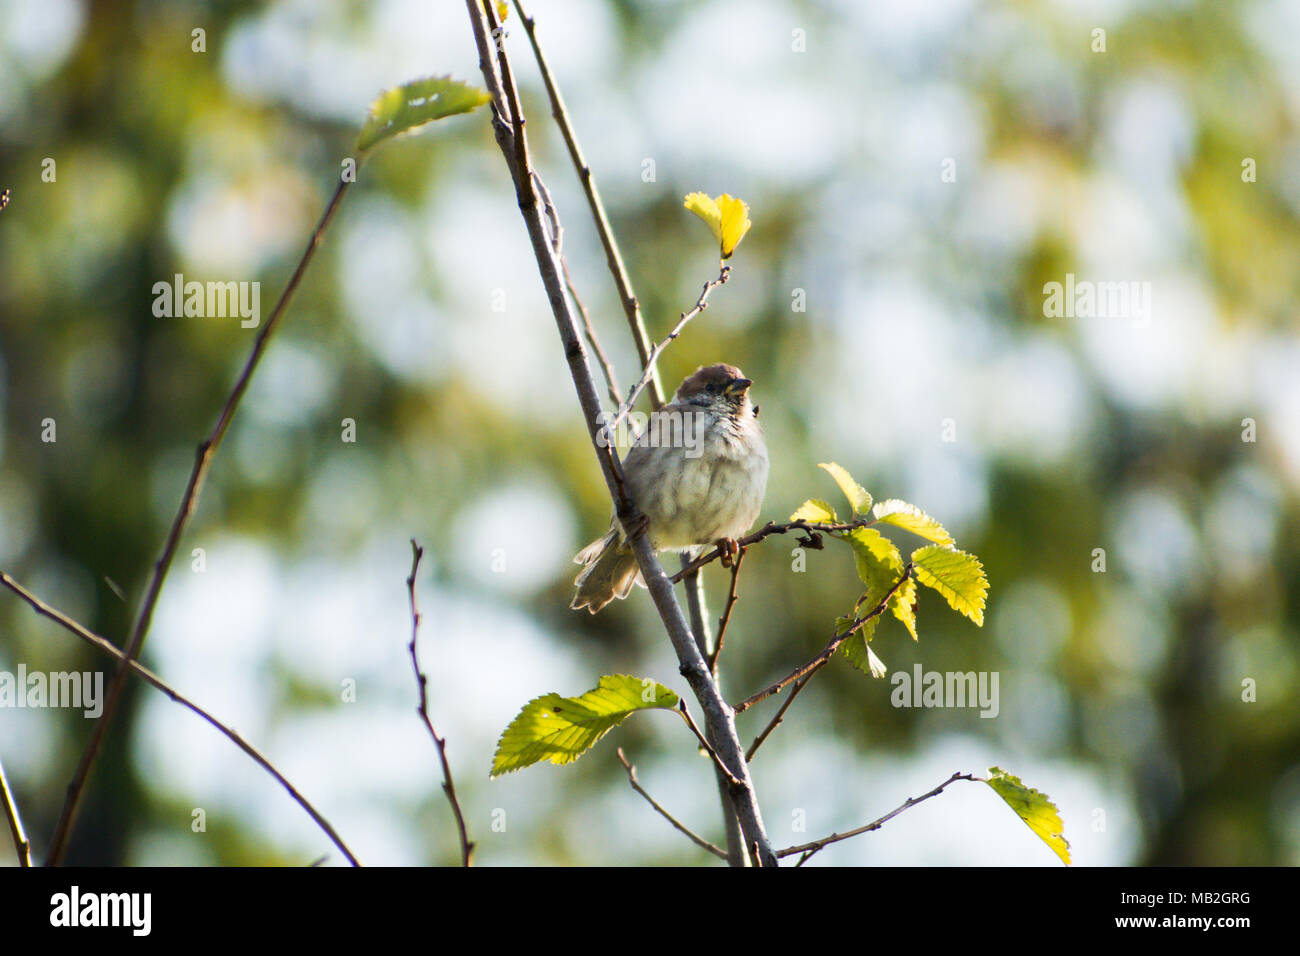 The Eurasian tree sparrows (Passer montanus) Tree sparrow sitting on a branch Stock Photo